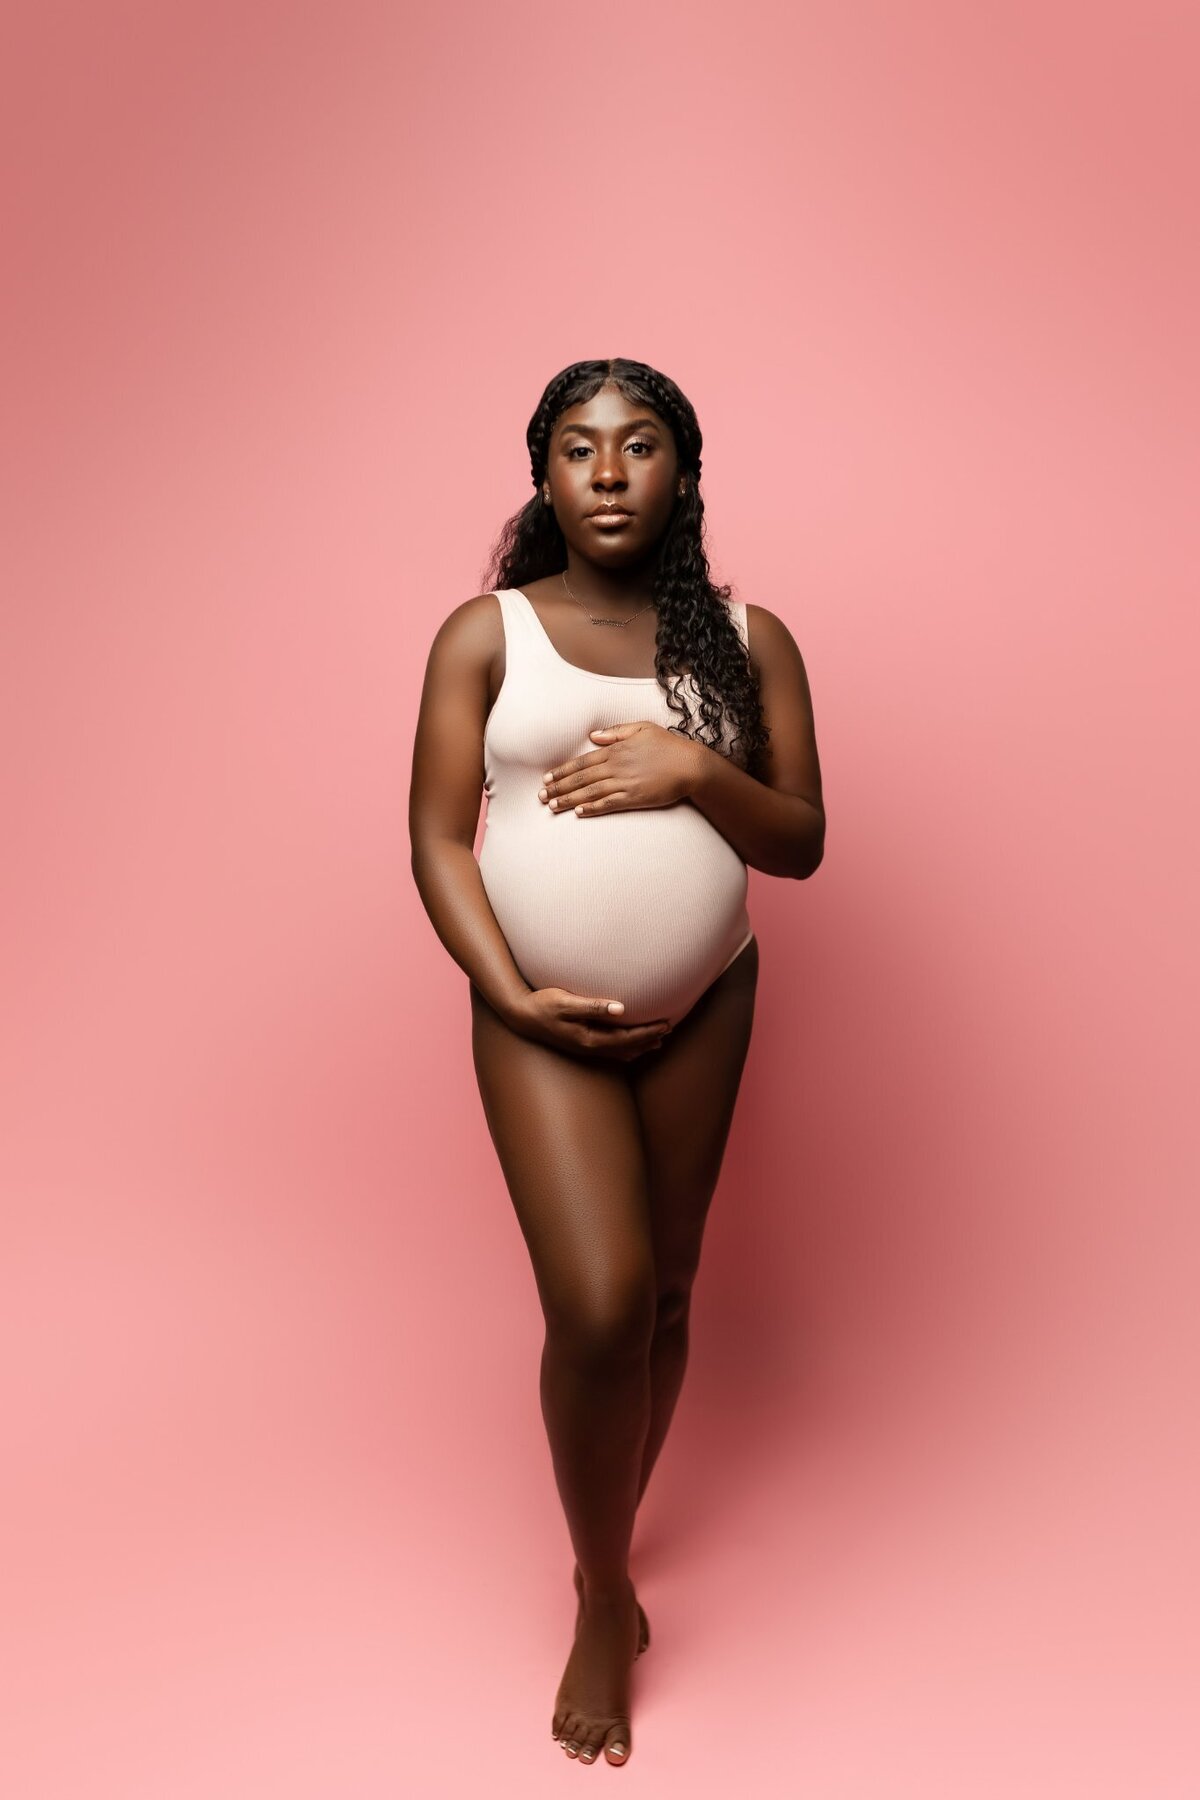 Expectant mother in pink body suit on pink backdrop for phoenix ariona maternity session